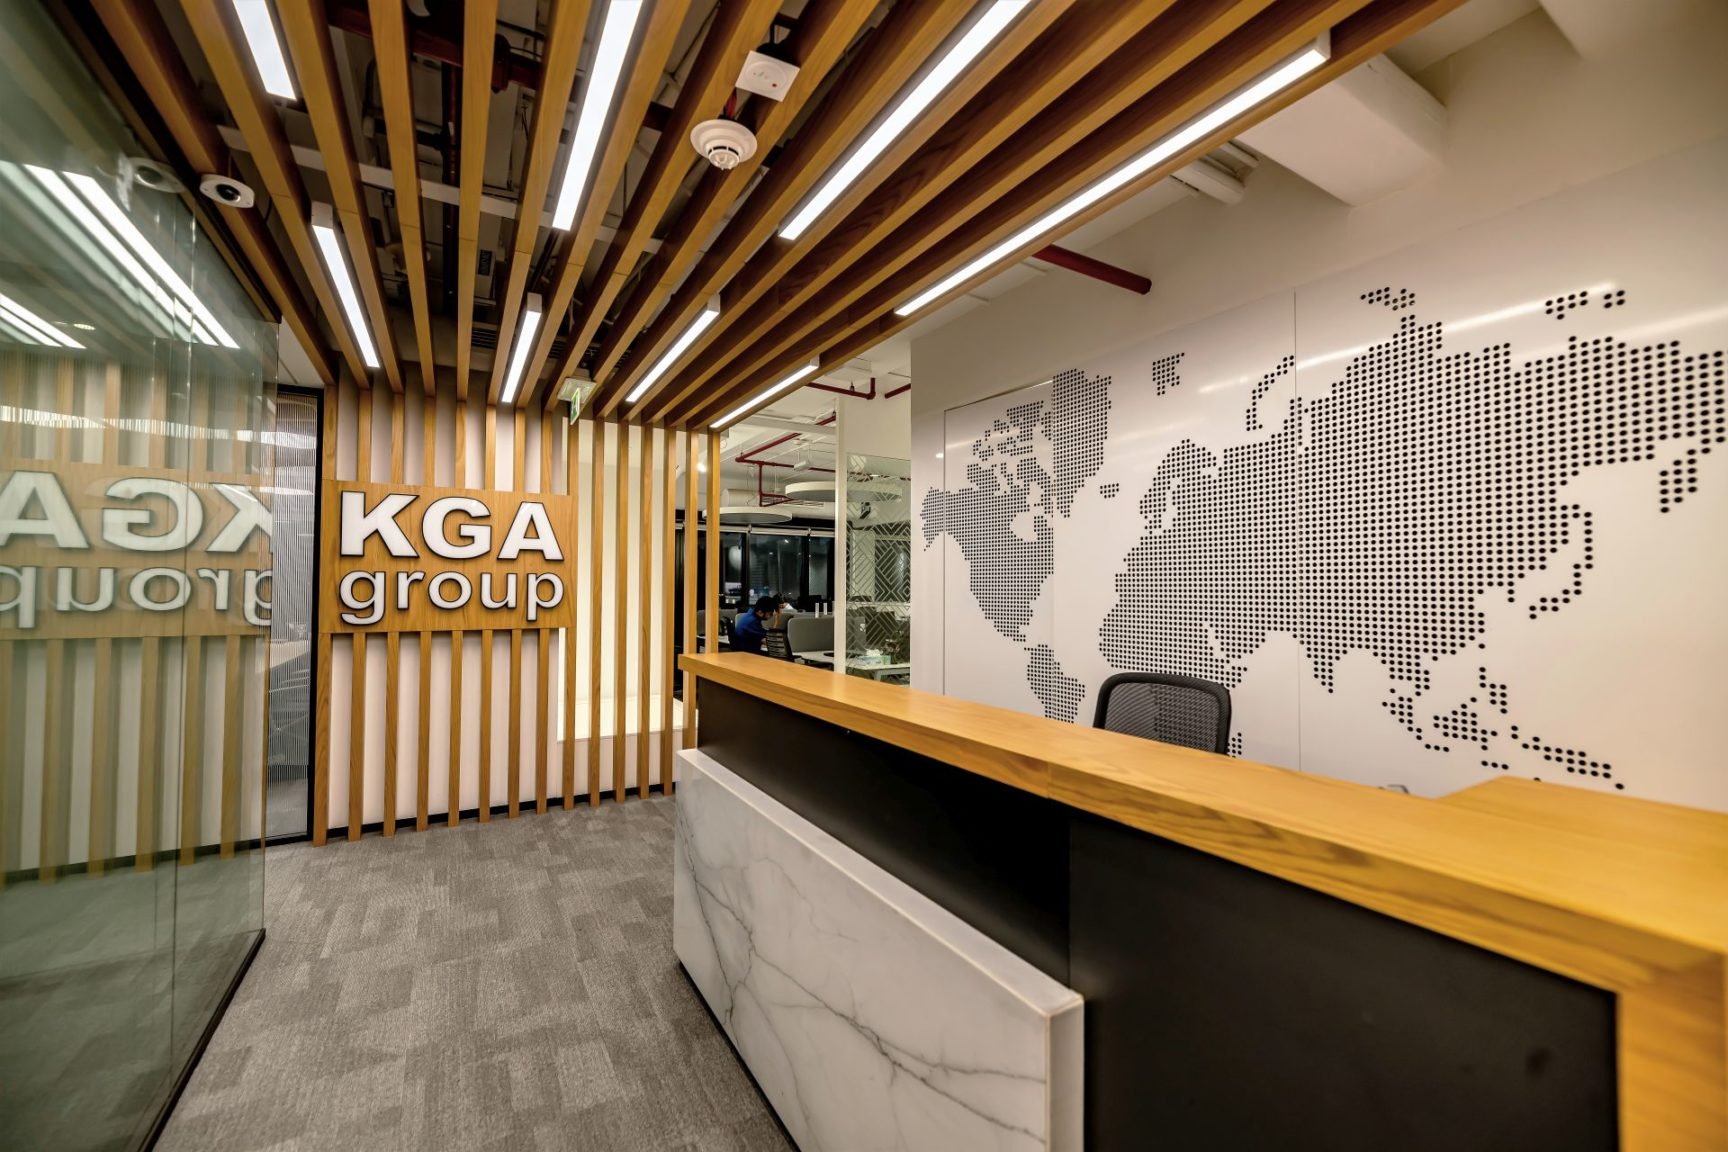 Owner in United States: KGA Group - Love That Design